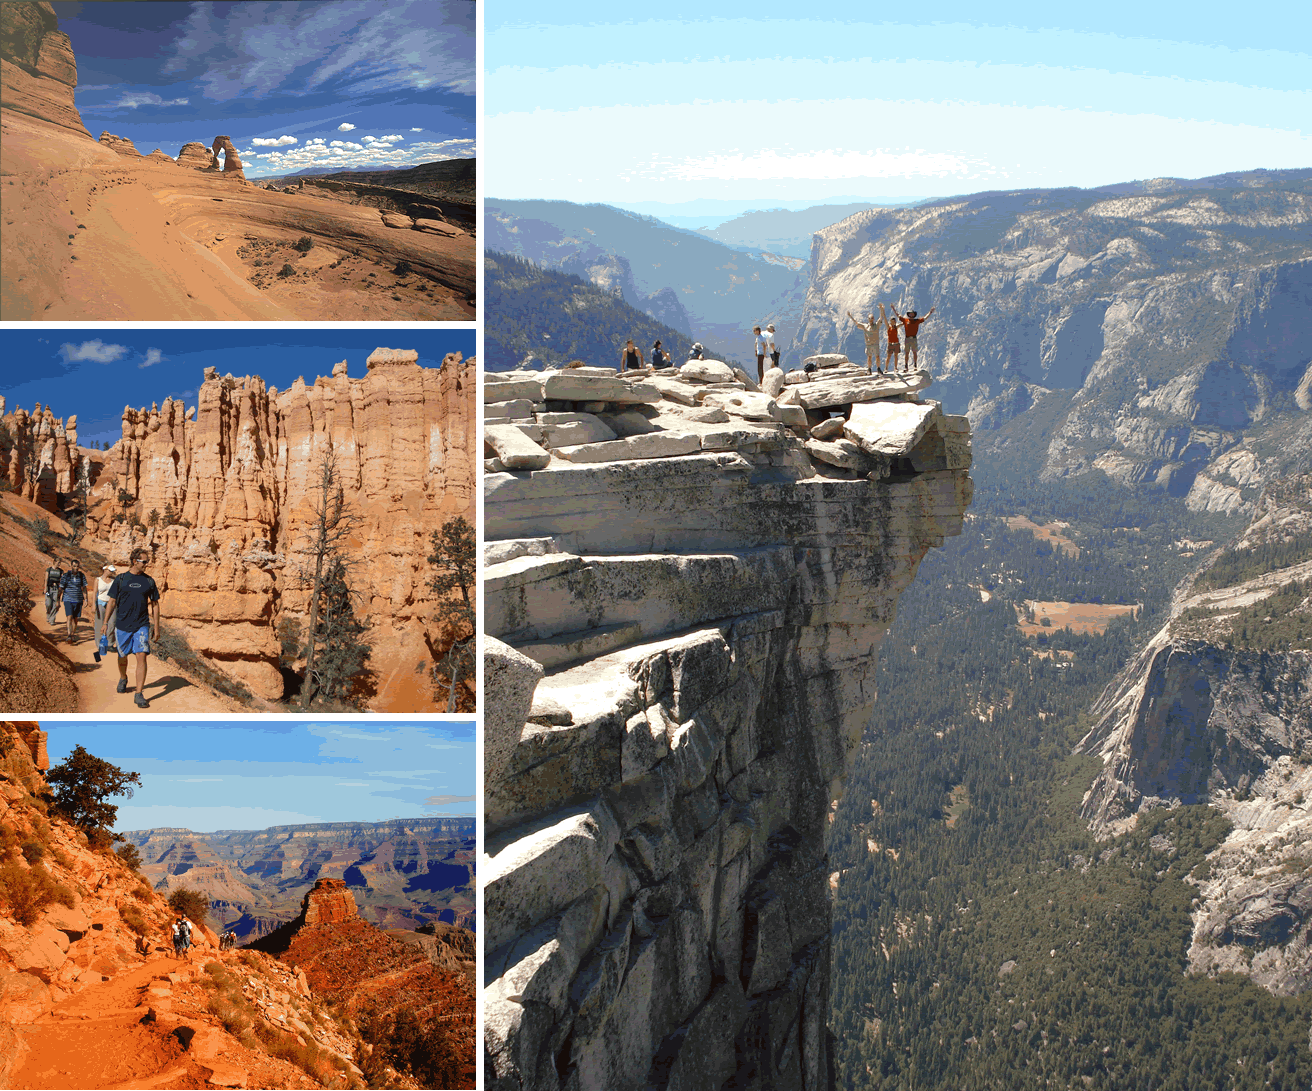 Get up close and personal with nature in America's national parks